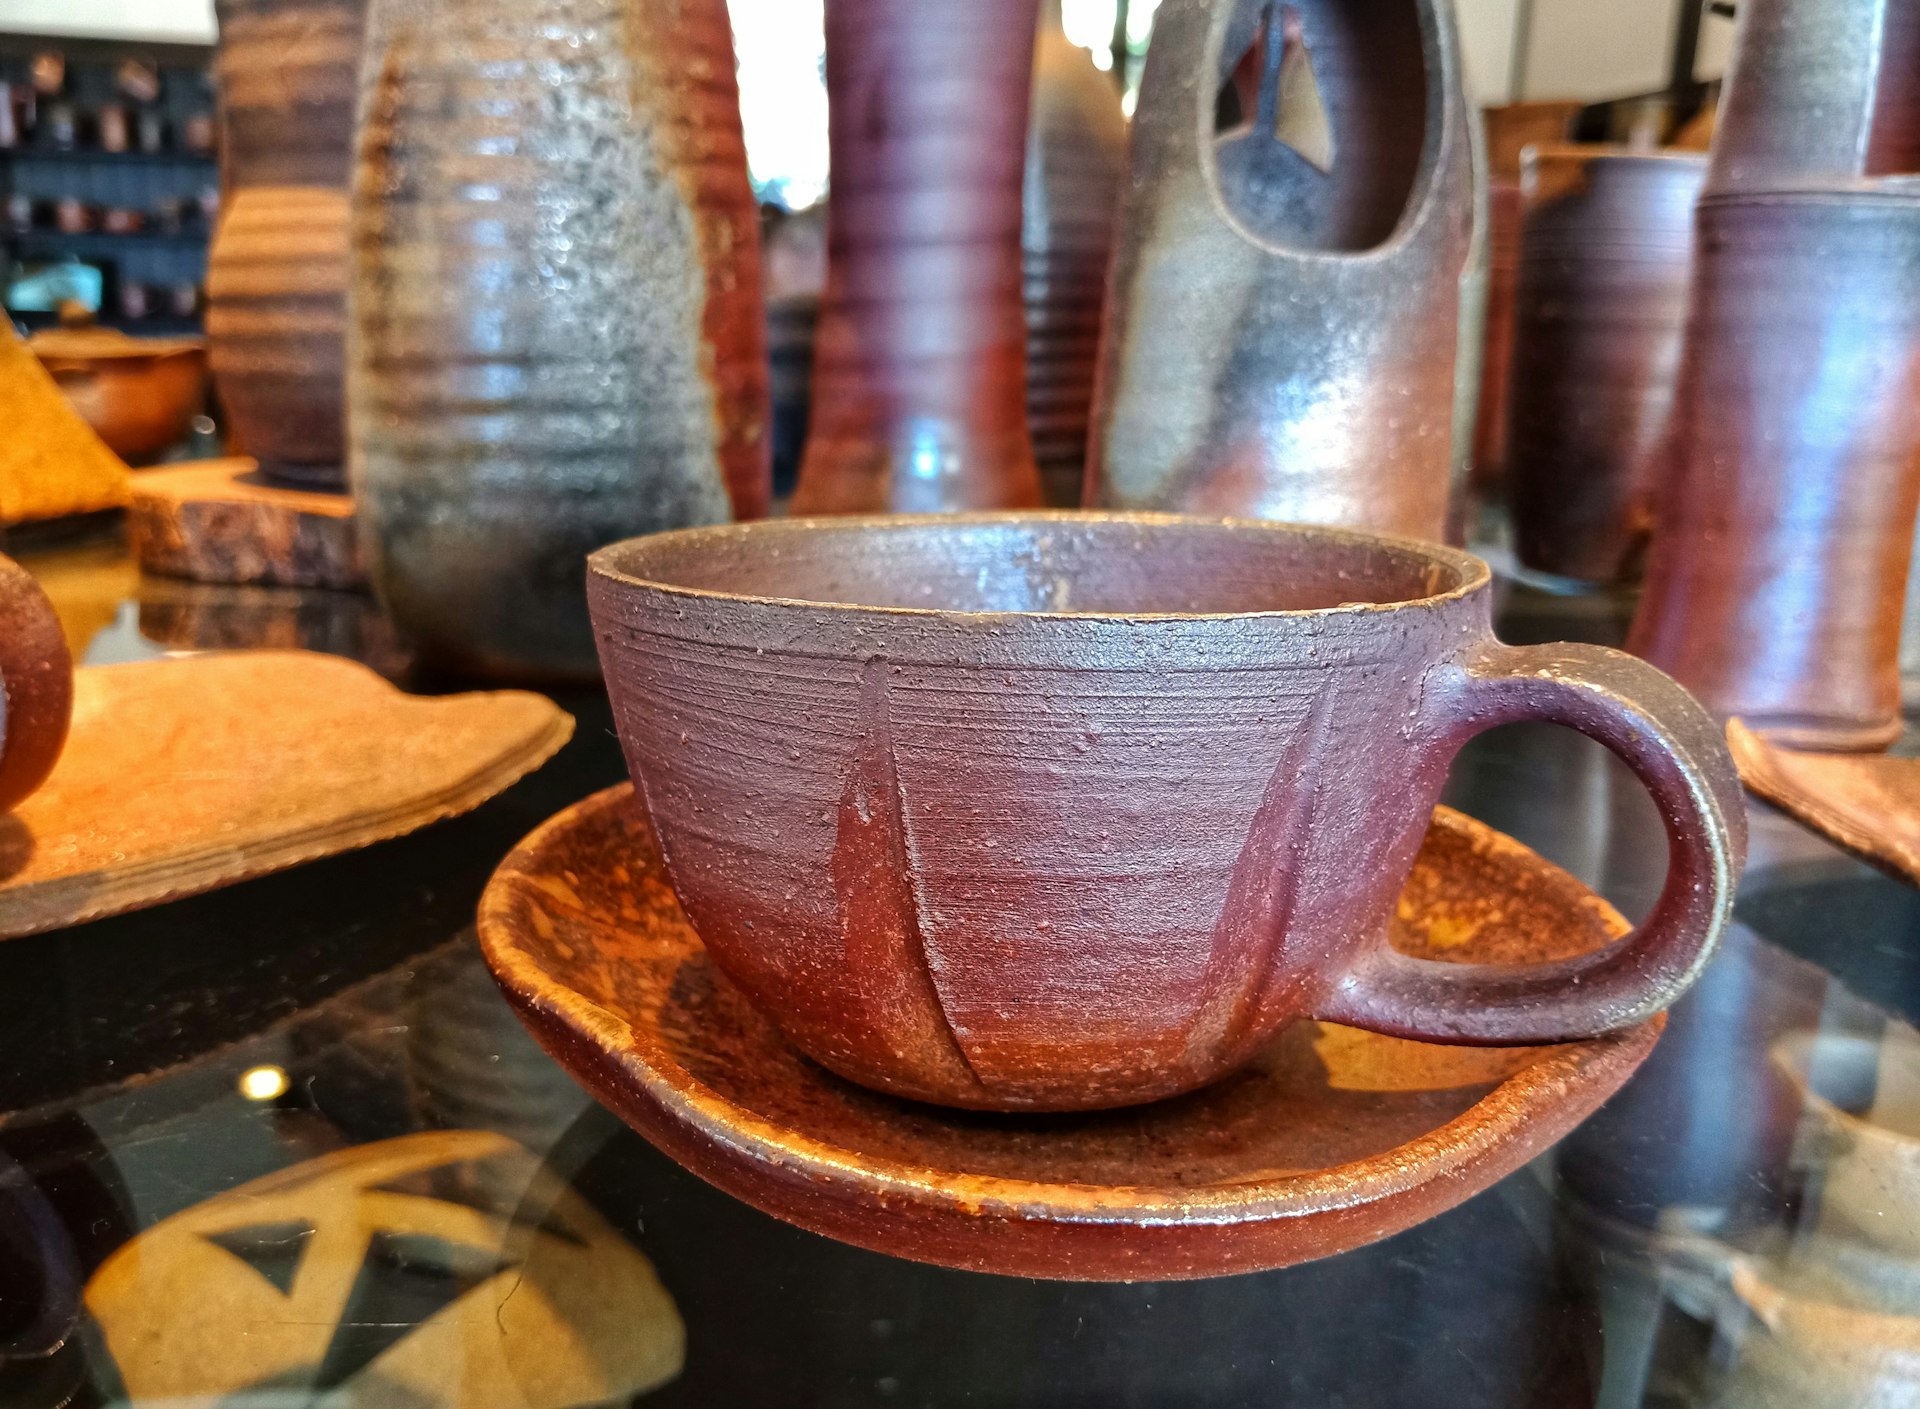 A red ceramic tea cup, made in the Bizen style, sits on a glass tabletop surrounded by other red-hued Bizen pottery.